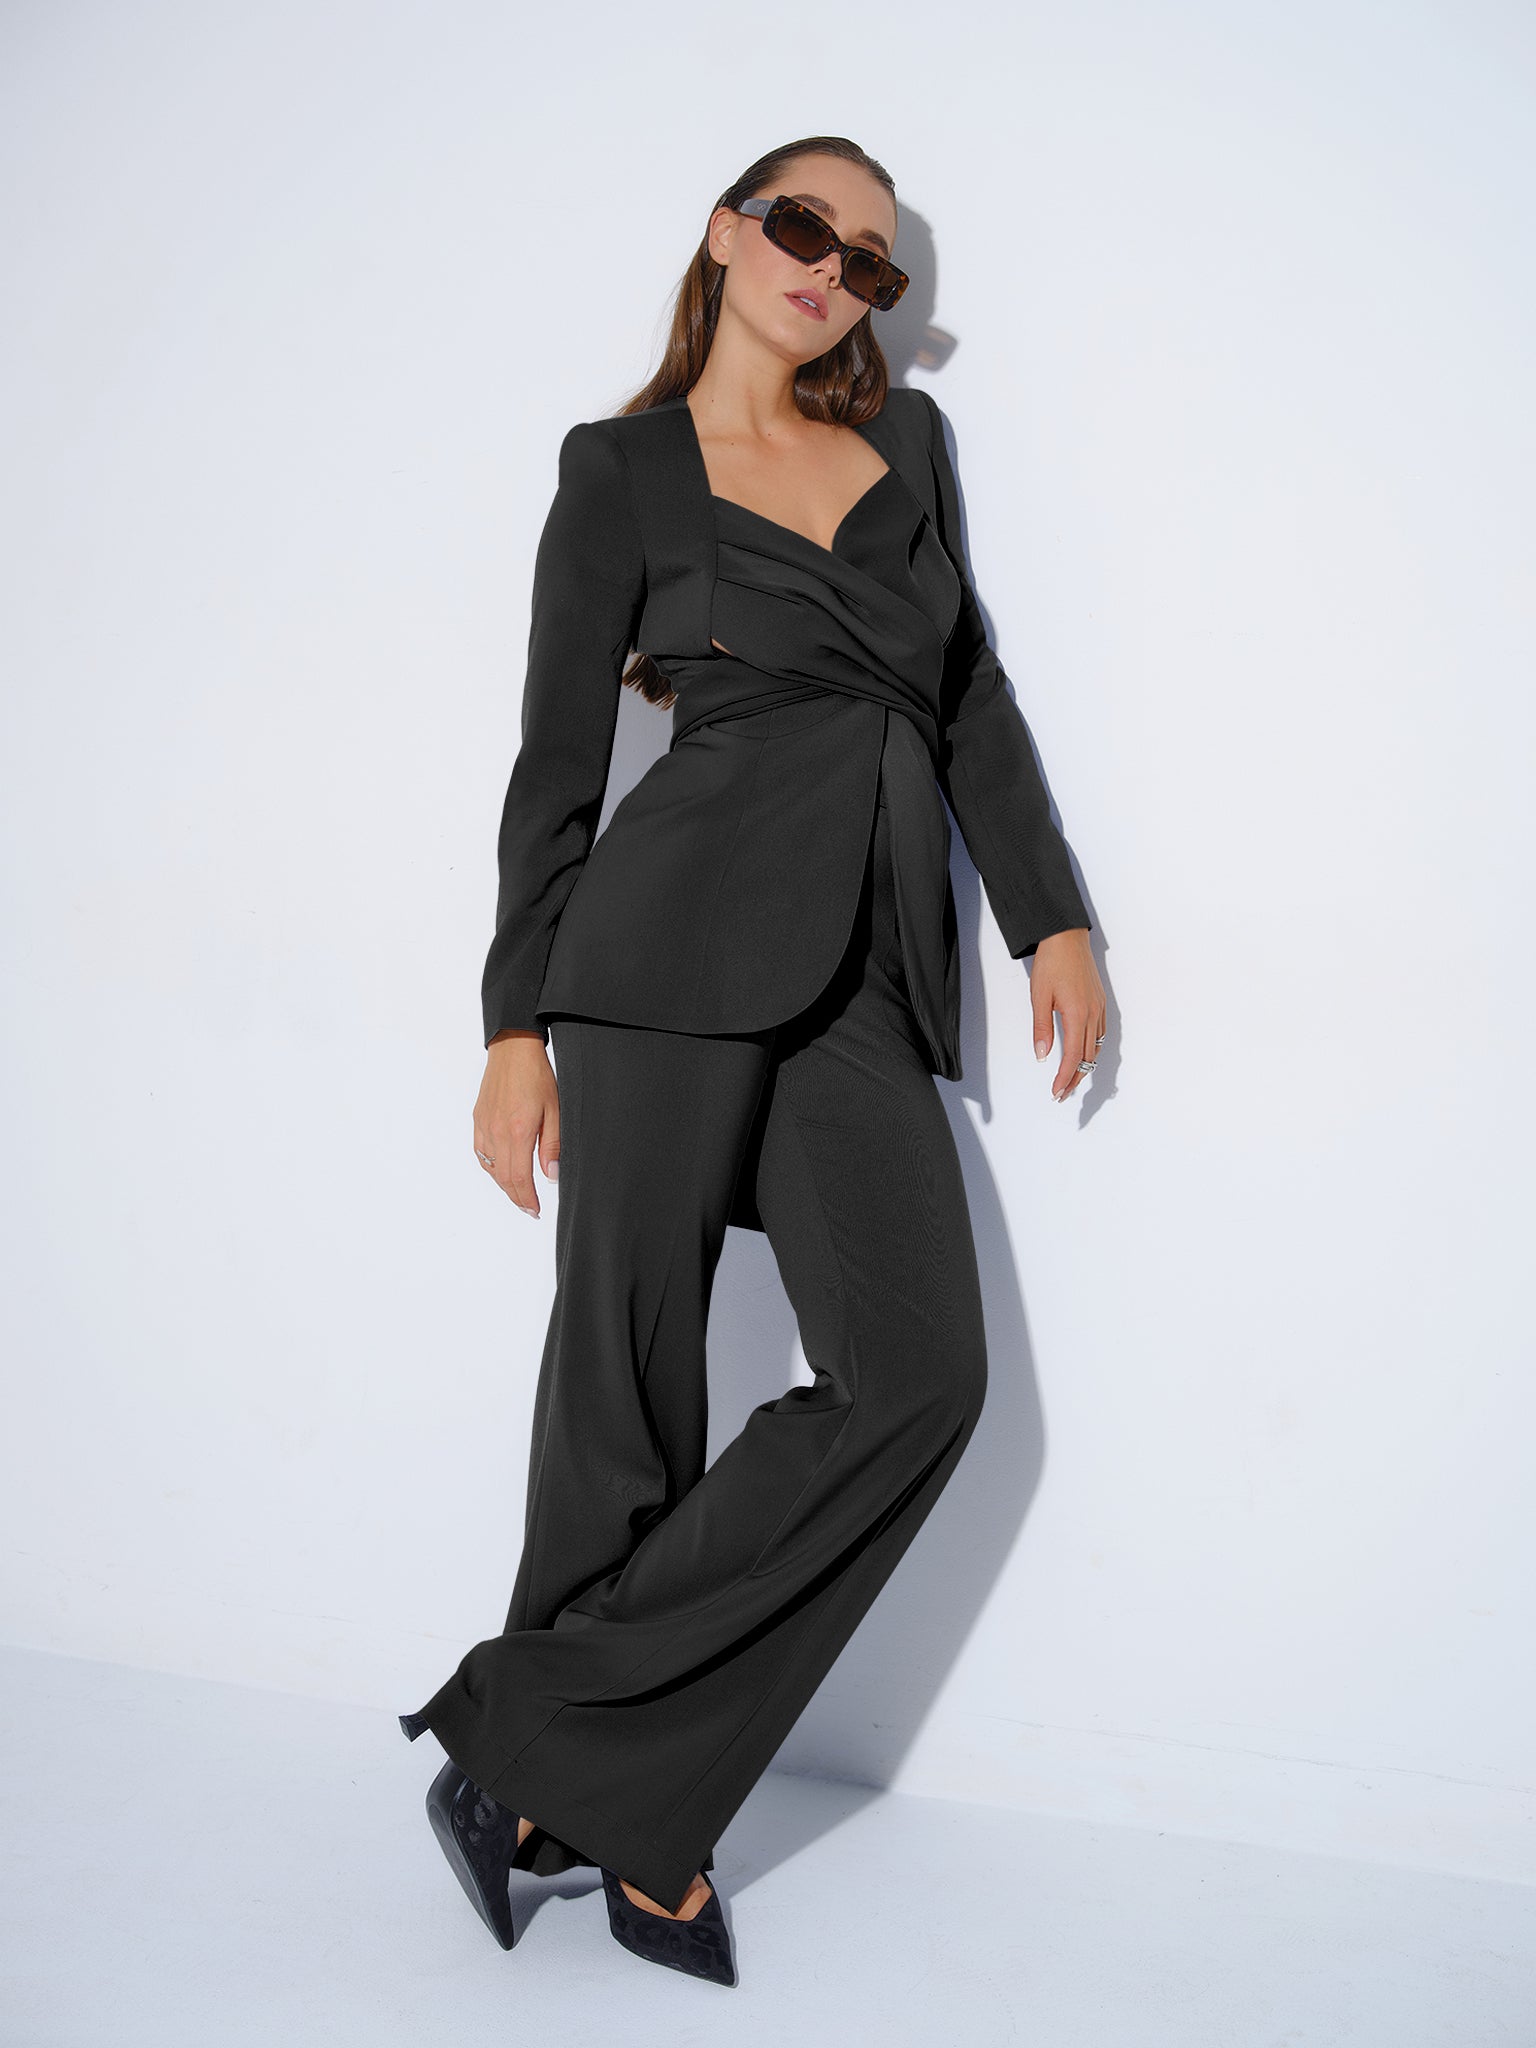 Tia Dorraine Magnetic Power Statement Cross Wrap Blazer This thigh-length design reimagines the classic blazer with a generous helping of creative flair. The piece features an impressive cross drape panels that create a sweetheart neckline when tied at th